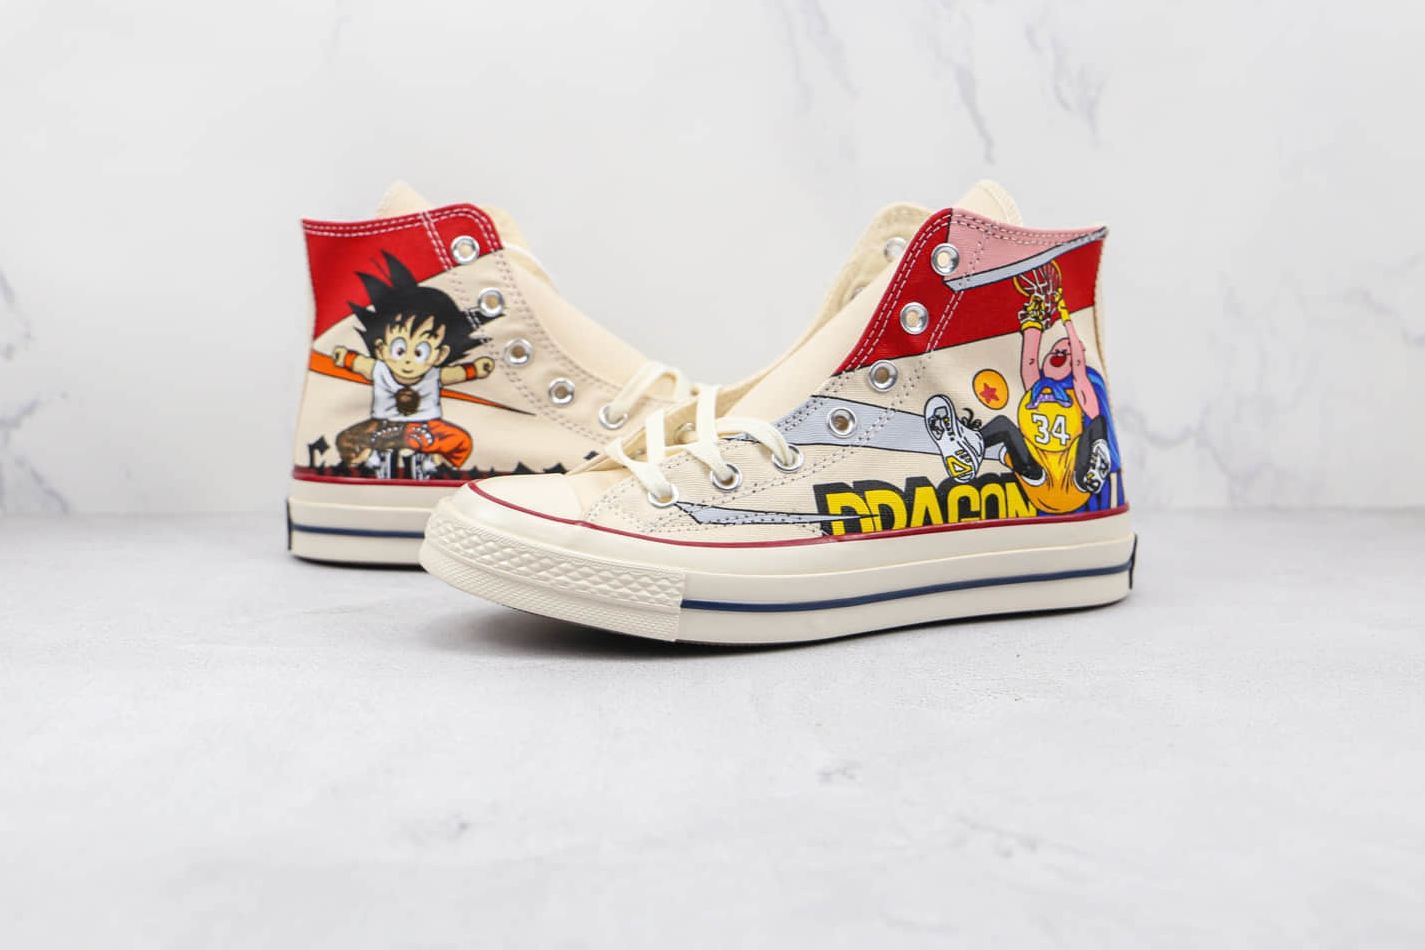 Dragon Ball x Converse Chuck Taylor All Star 70 Hi White 167781C: Iconic Collaboration for Anime Fans